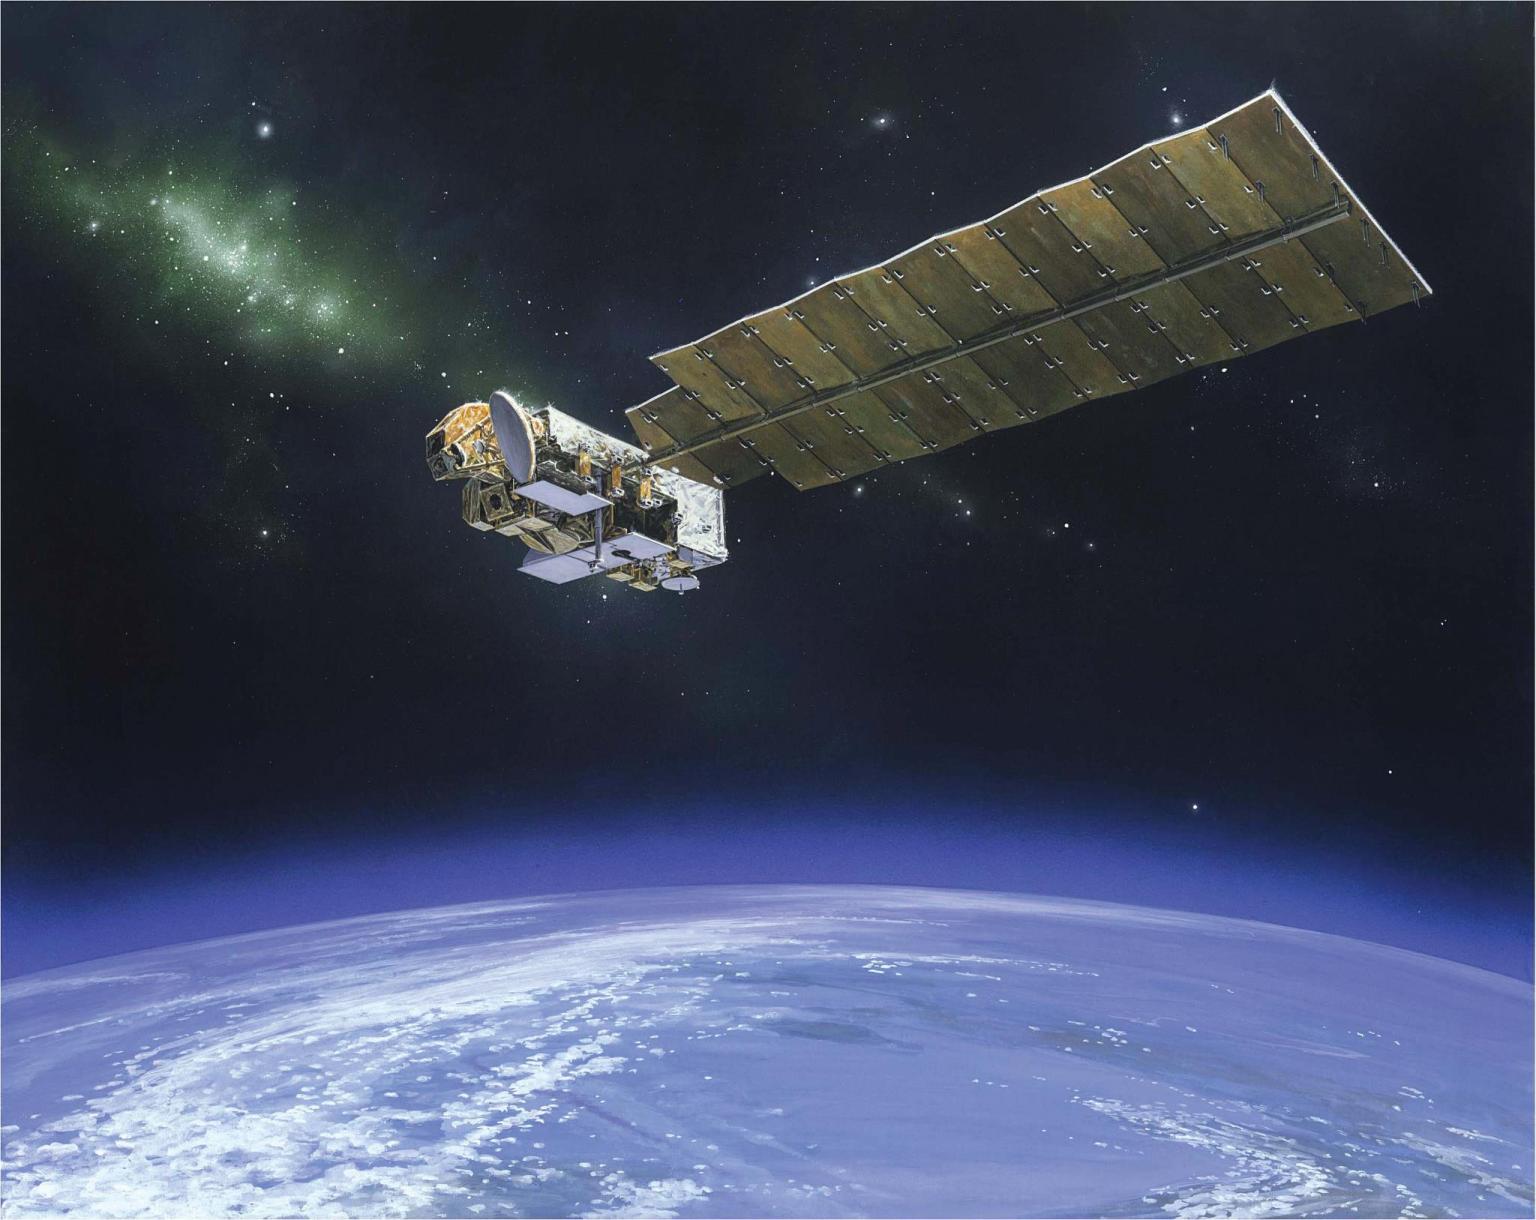 This image is an animated version of the Aura satellite in orbit. The satellite, seen centered in the image, is made up of silver and gold box-like shapes and instruments. Spanning out to the right of the satellite is a long sheet of solar panels. In the background of the image at the bottom is a portion of Earth seen with clouds and a blue haze surrounding it. The top of the background is the deep black of space, with a cluster of green colored stars to the left.